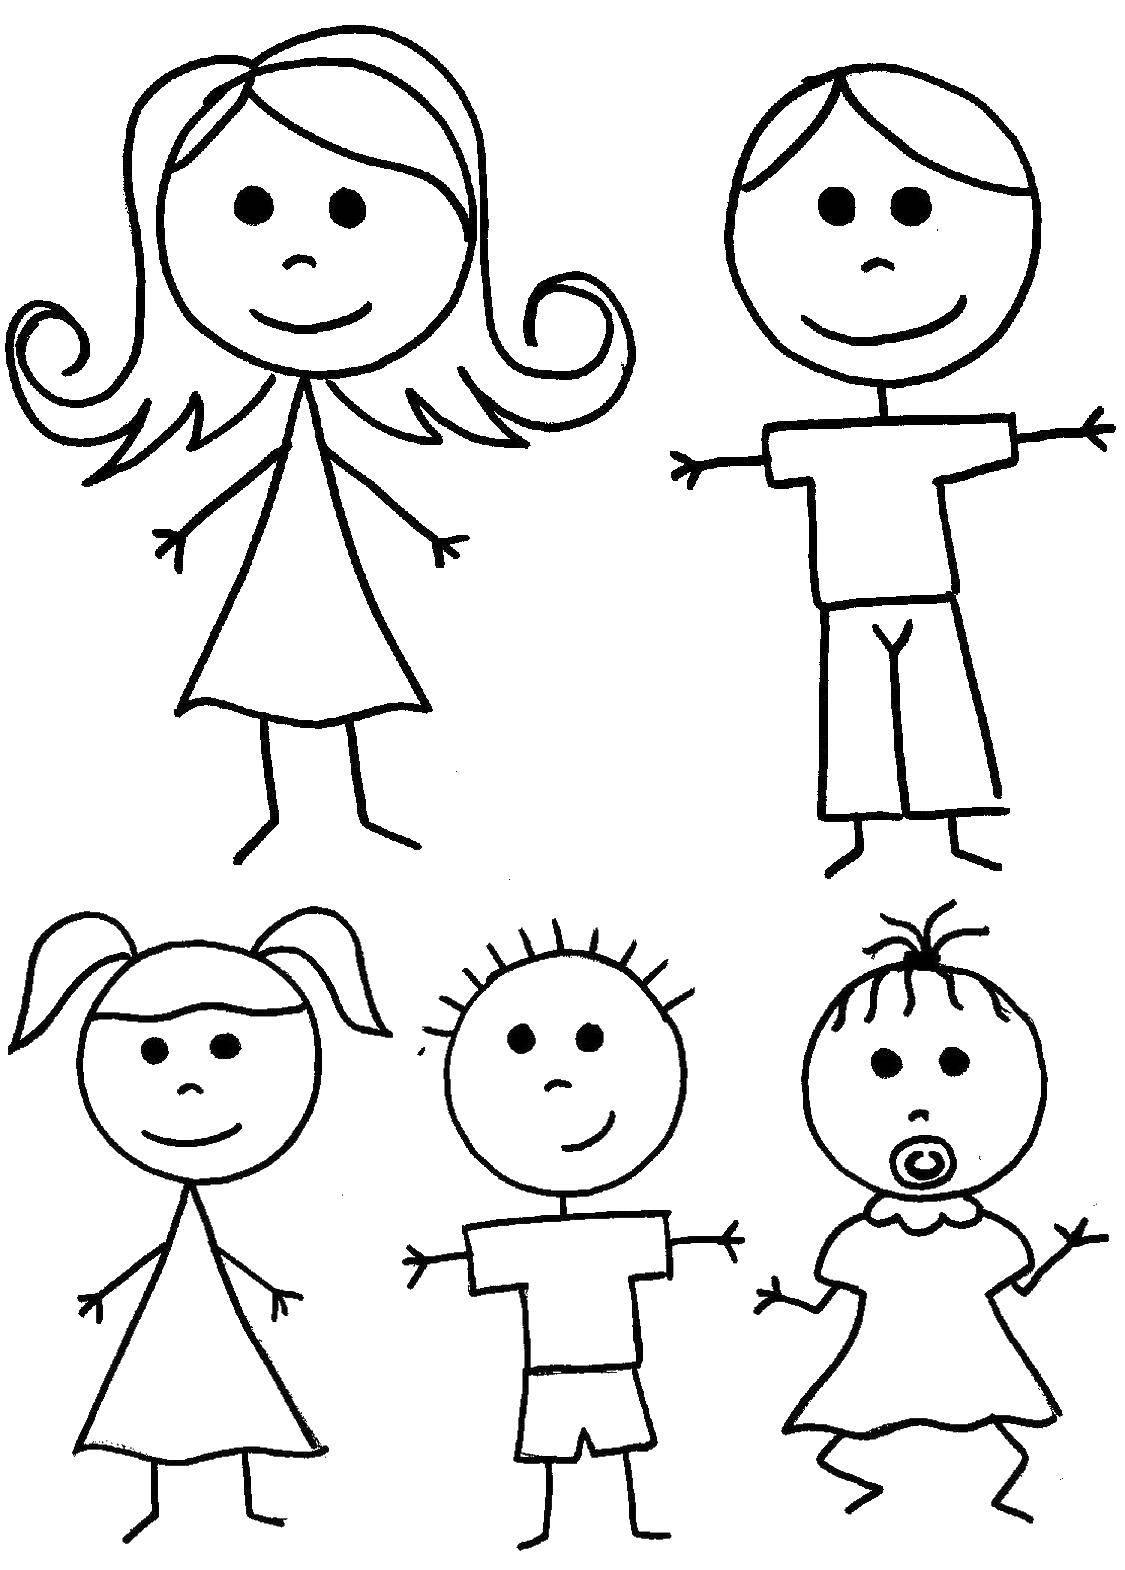 Coloring Family. Category Family members. Tags:  family, family members.